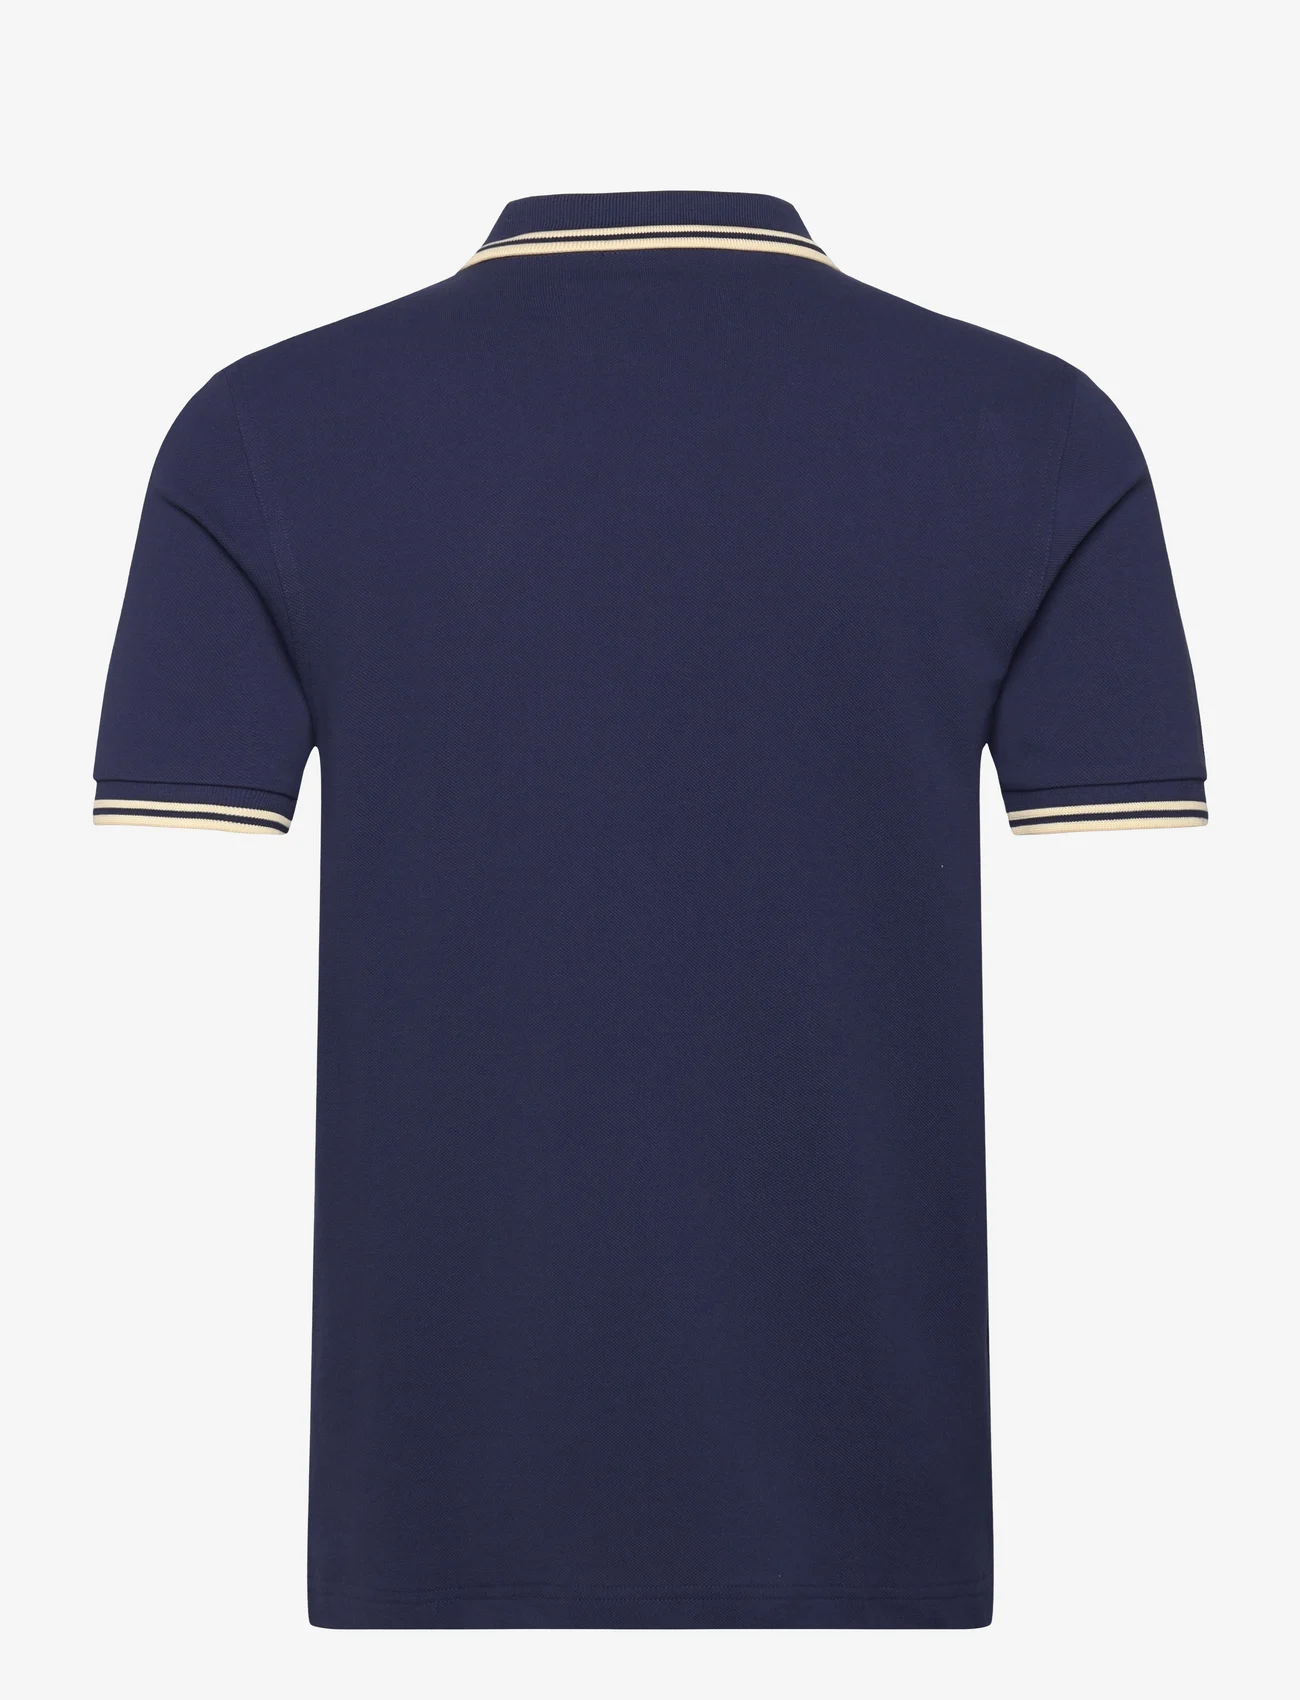 Fred Perry - TWIN TIPPED FP SHIRT - kortærmede poloer - frnavy/ice cream - 1